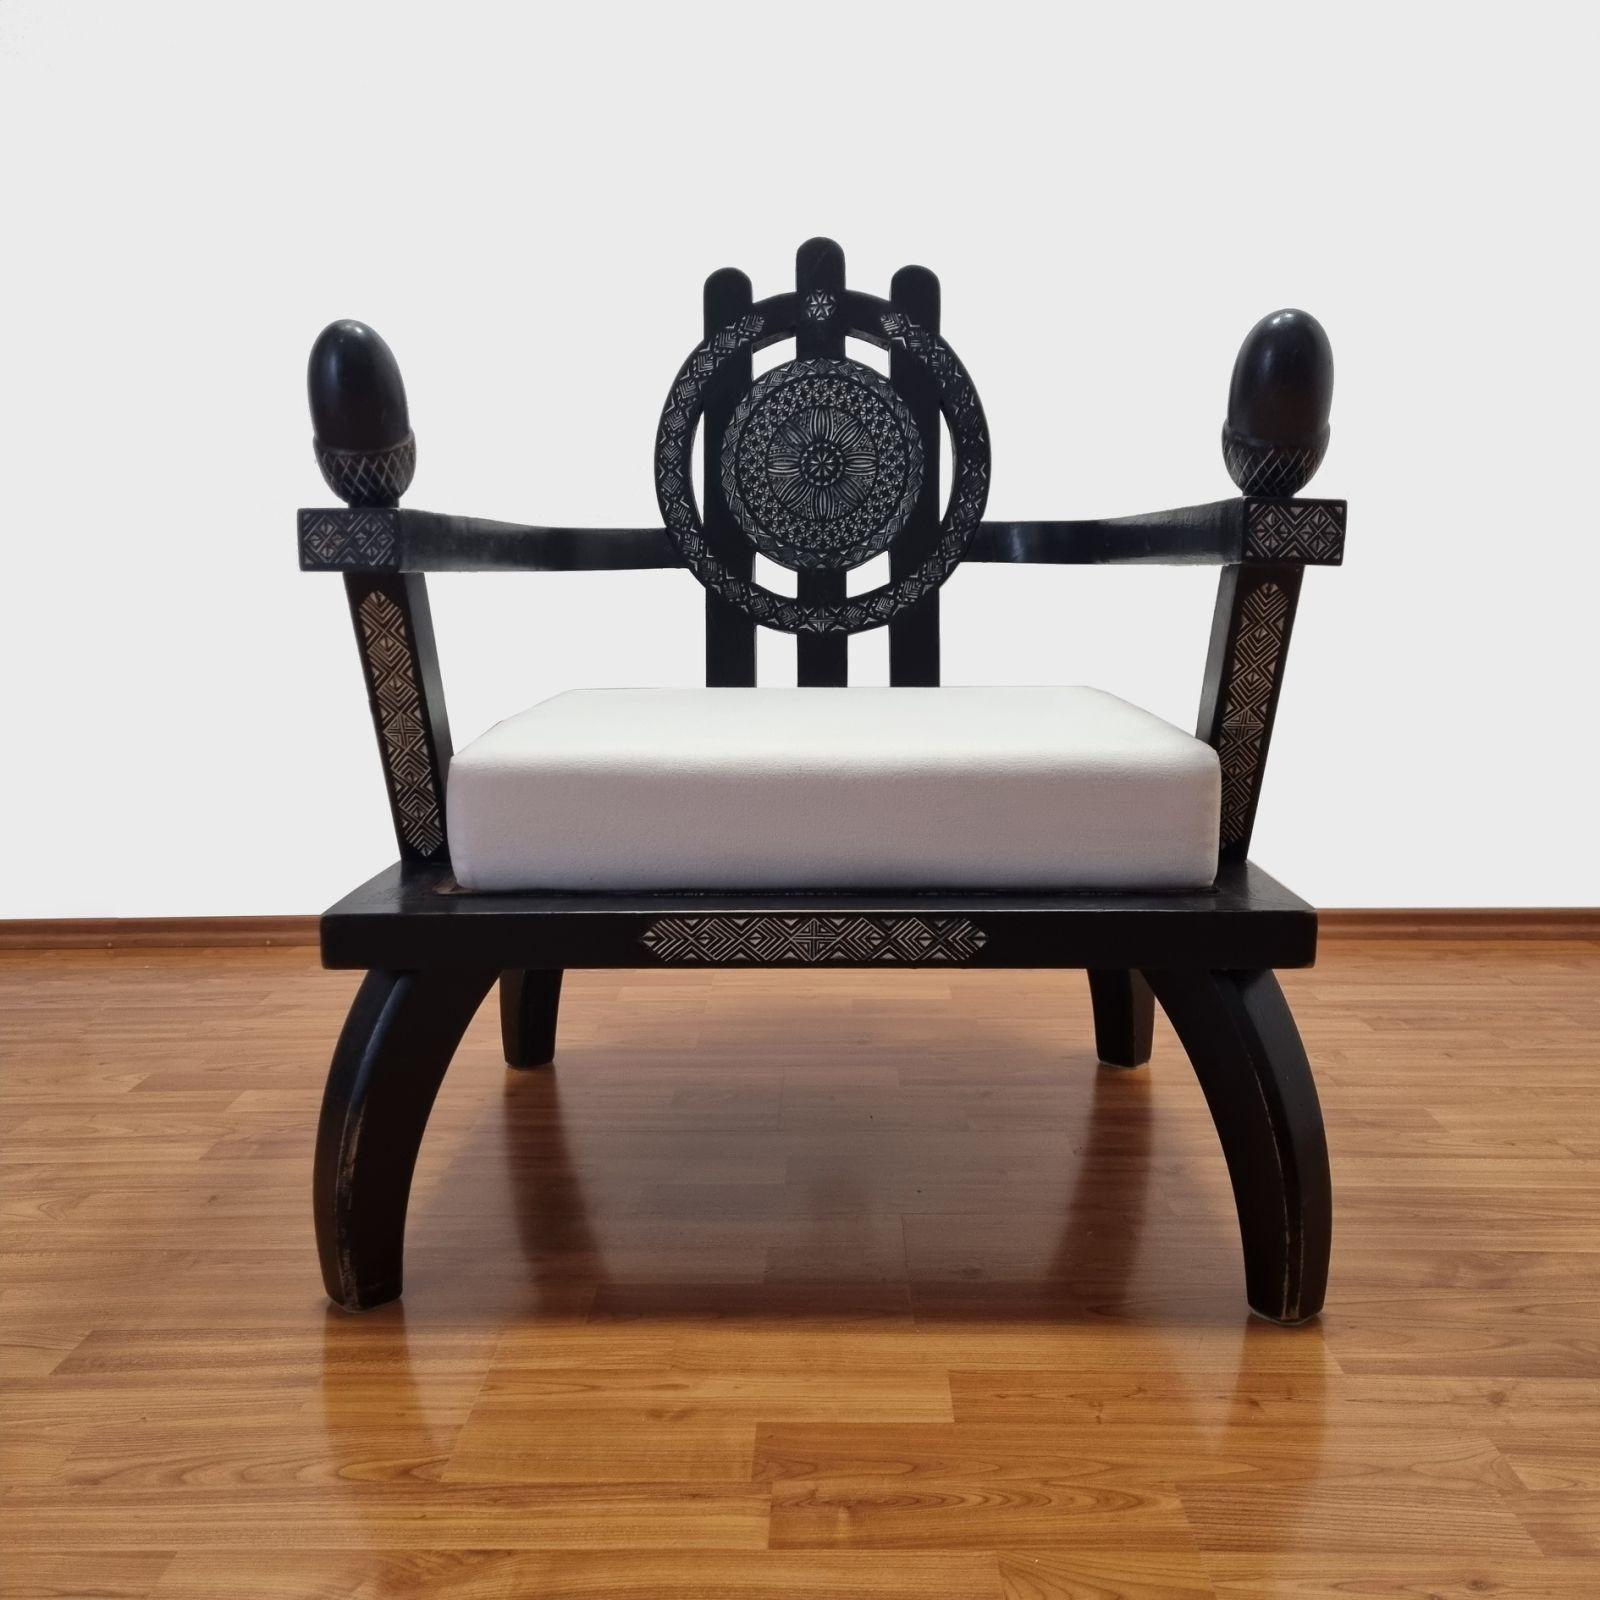 Rare Black Lounge armchair designed by Ettore Zaccari in the 20s, produced in the 50s.
Made of solid wood, in very good vintage condition.